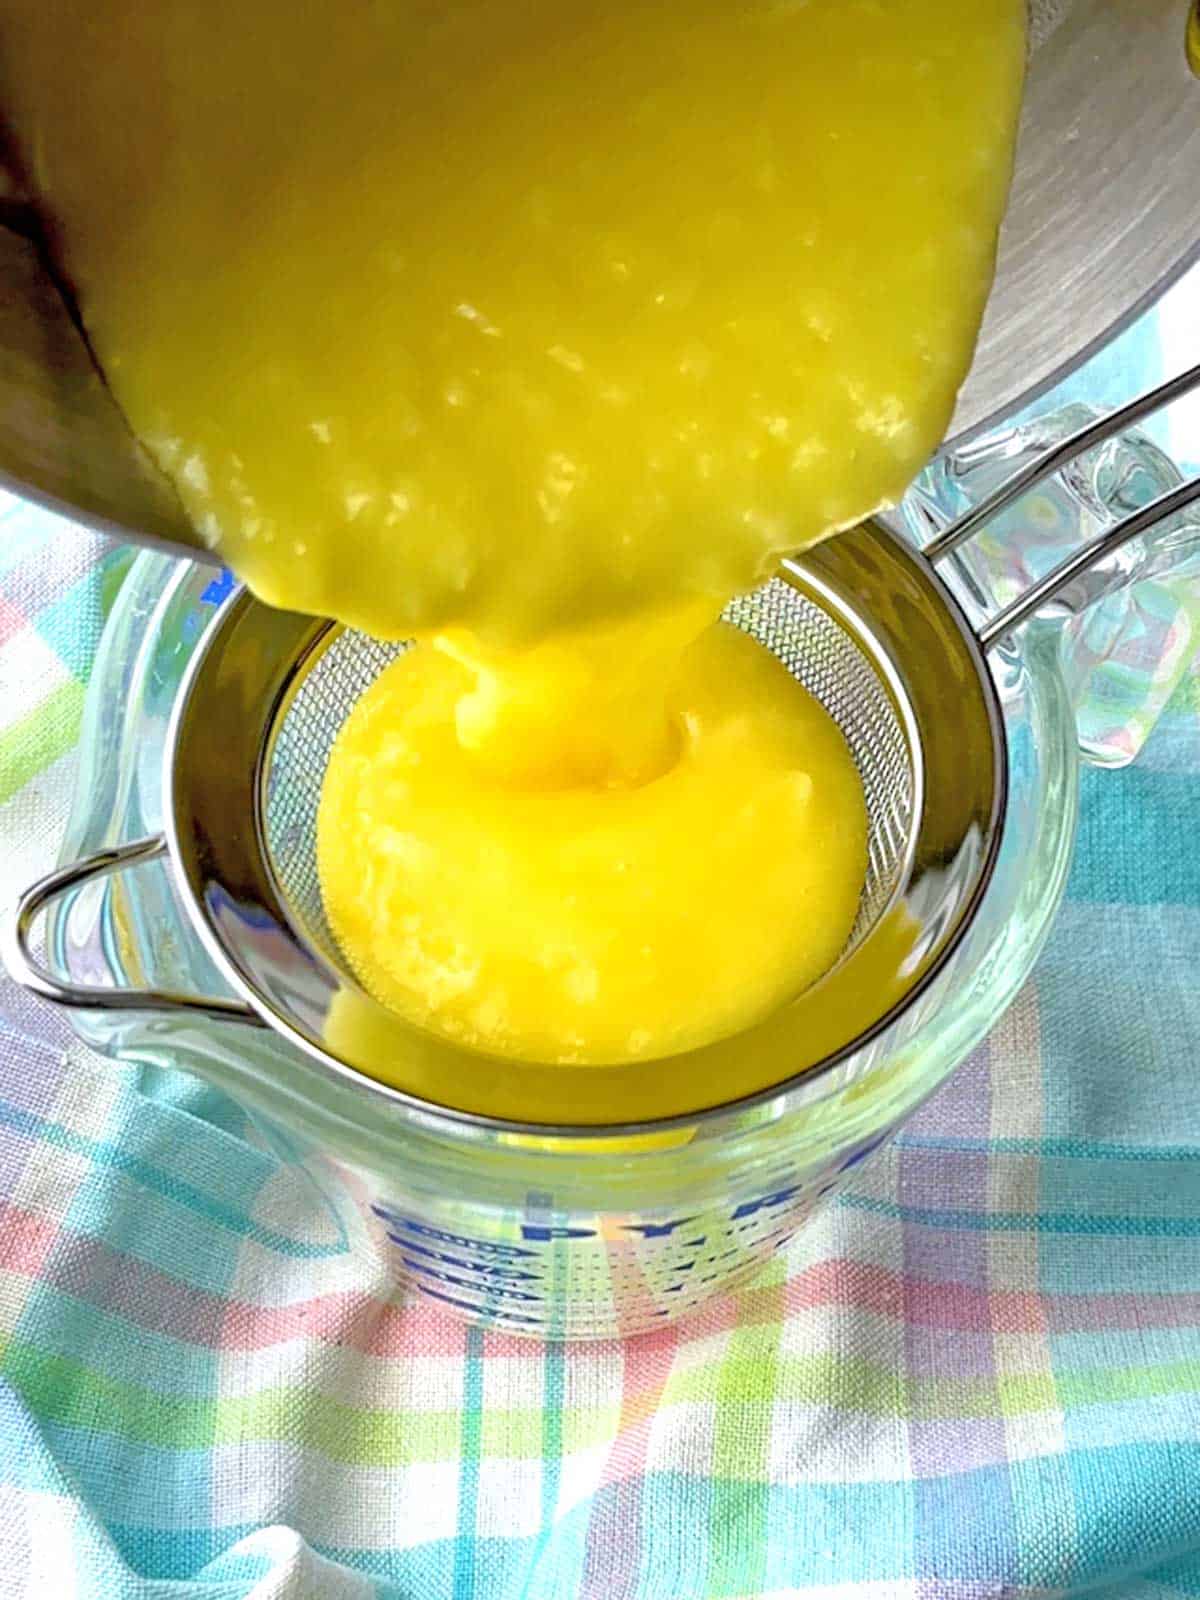 Pouring the lemon curd into a wire mesh strainer set over a measuring cup.